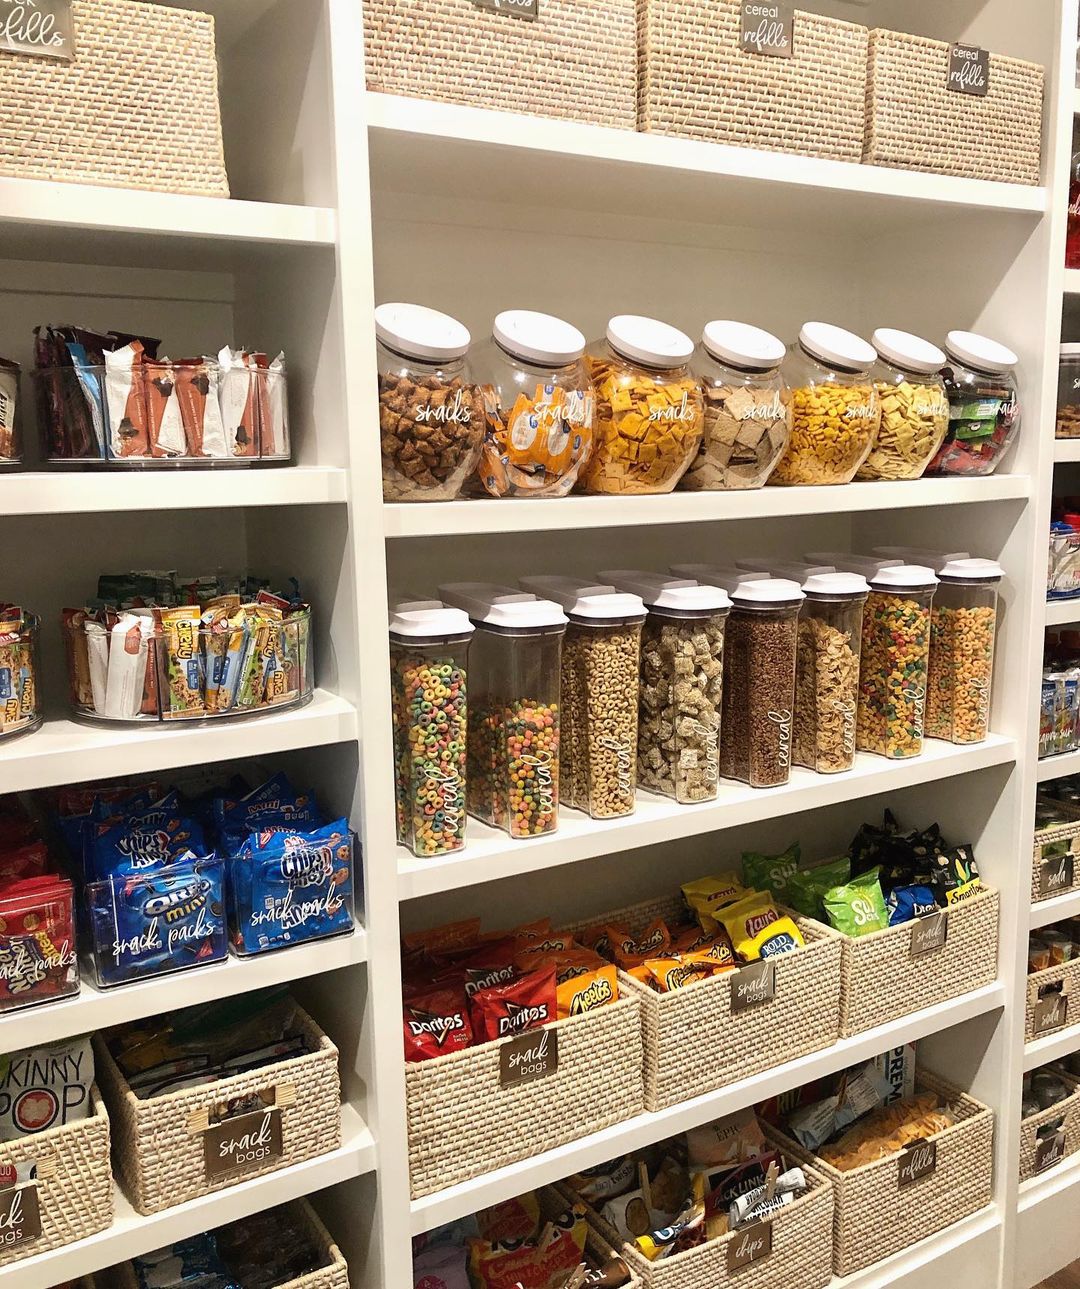 Pantry organized with storage containers and glass canisters. Photo by Instagram user @azhouseoforder